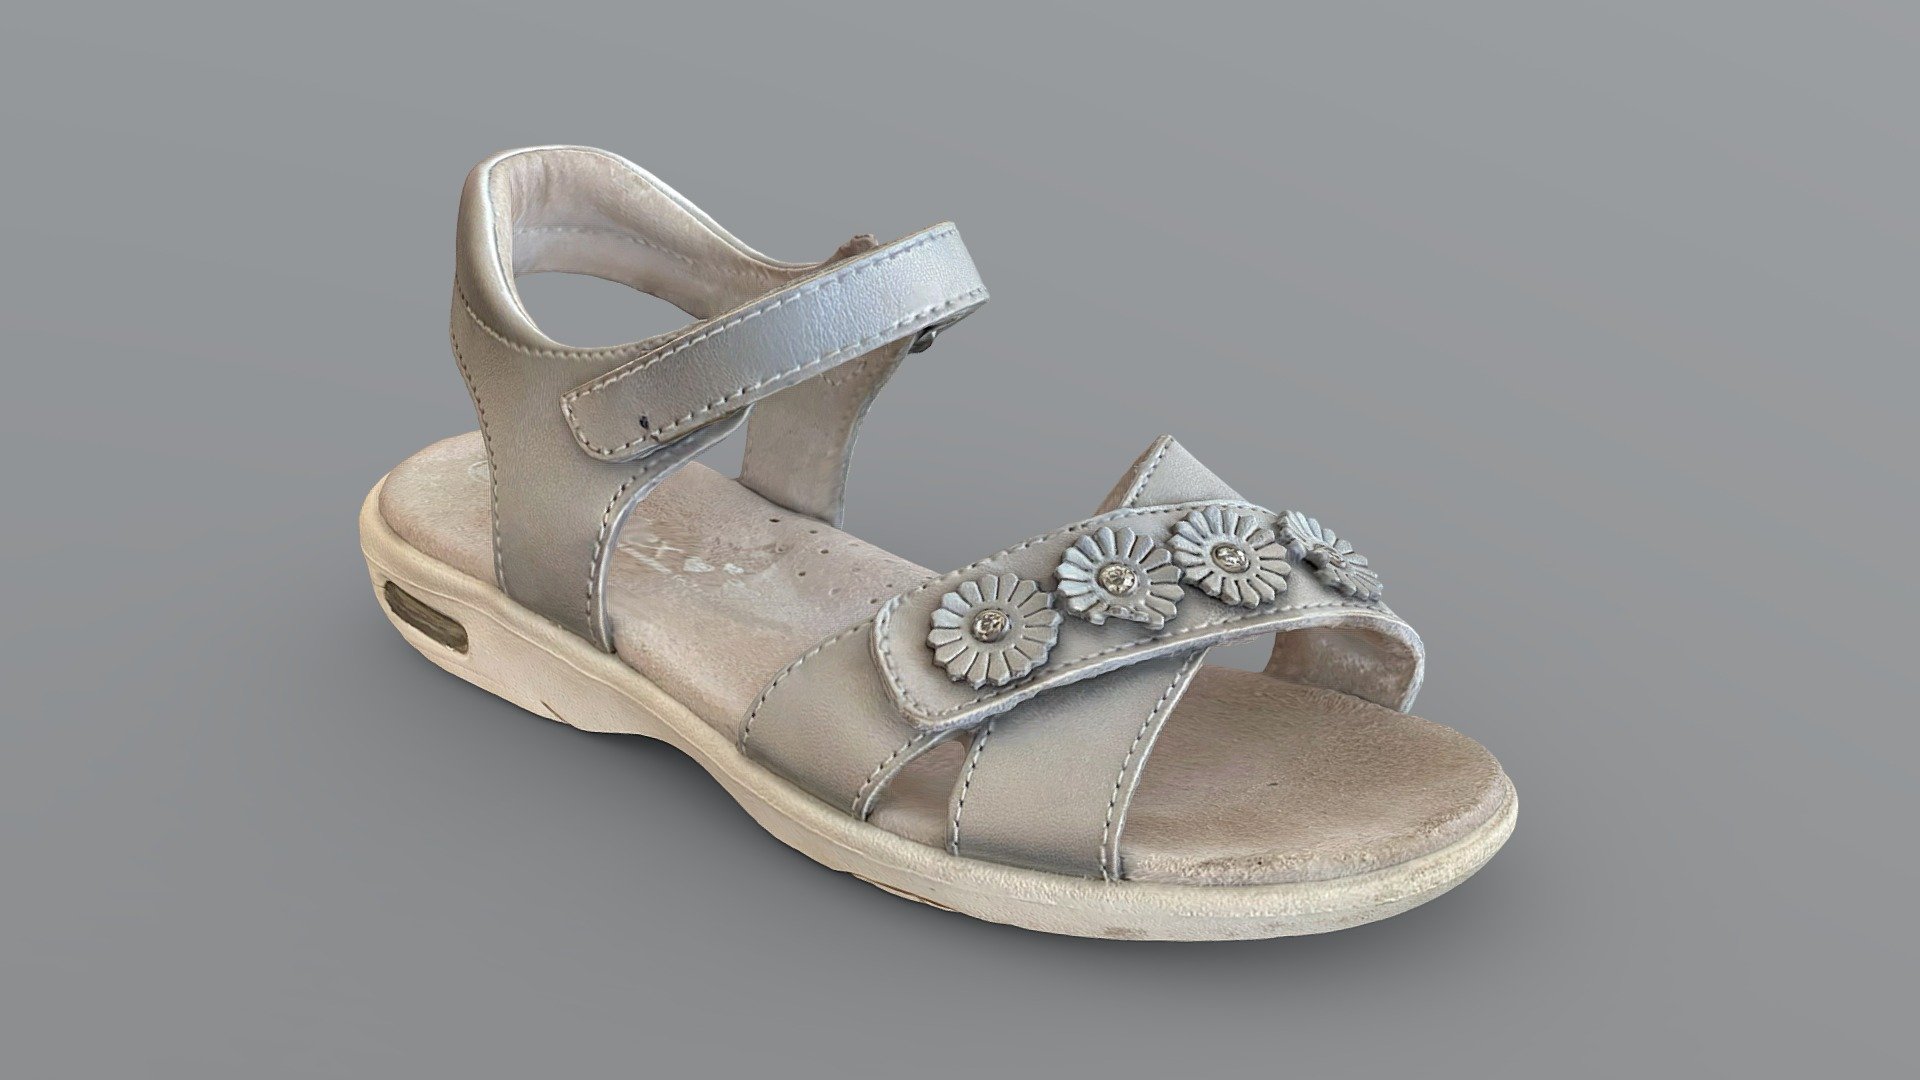 A much better 3D re-scan of a girl’s well worn silver sandal - Airflex branded.

Created with Polycam - Girls Sandal shoe - Airflex 3D scan - Download Free 3D model by jkyfk 3d model